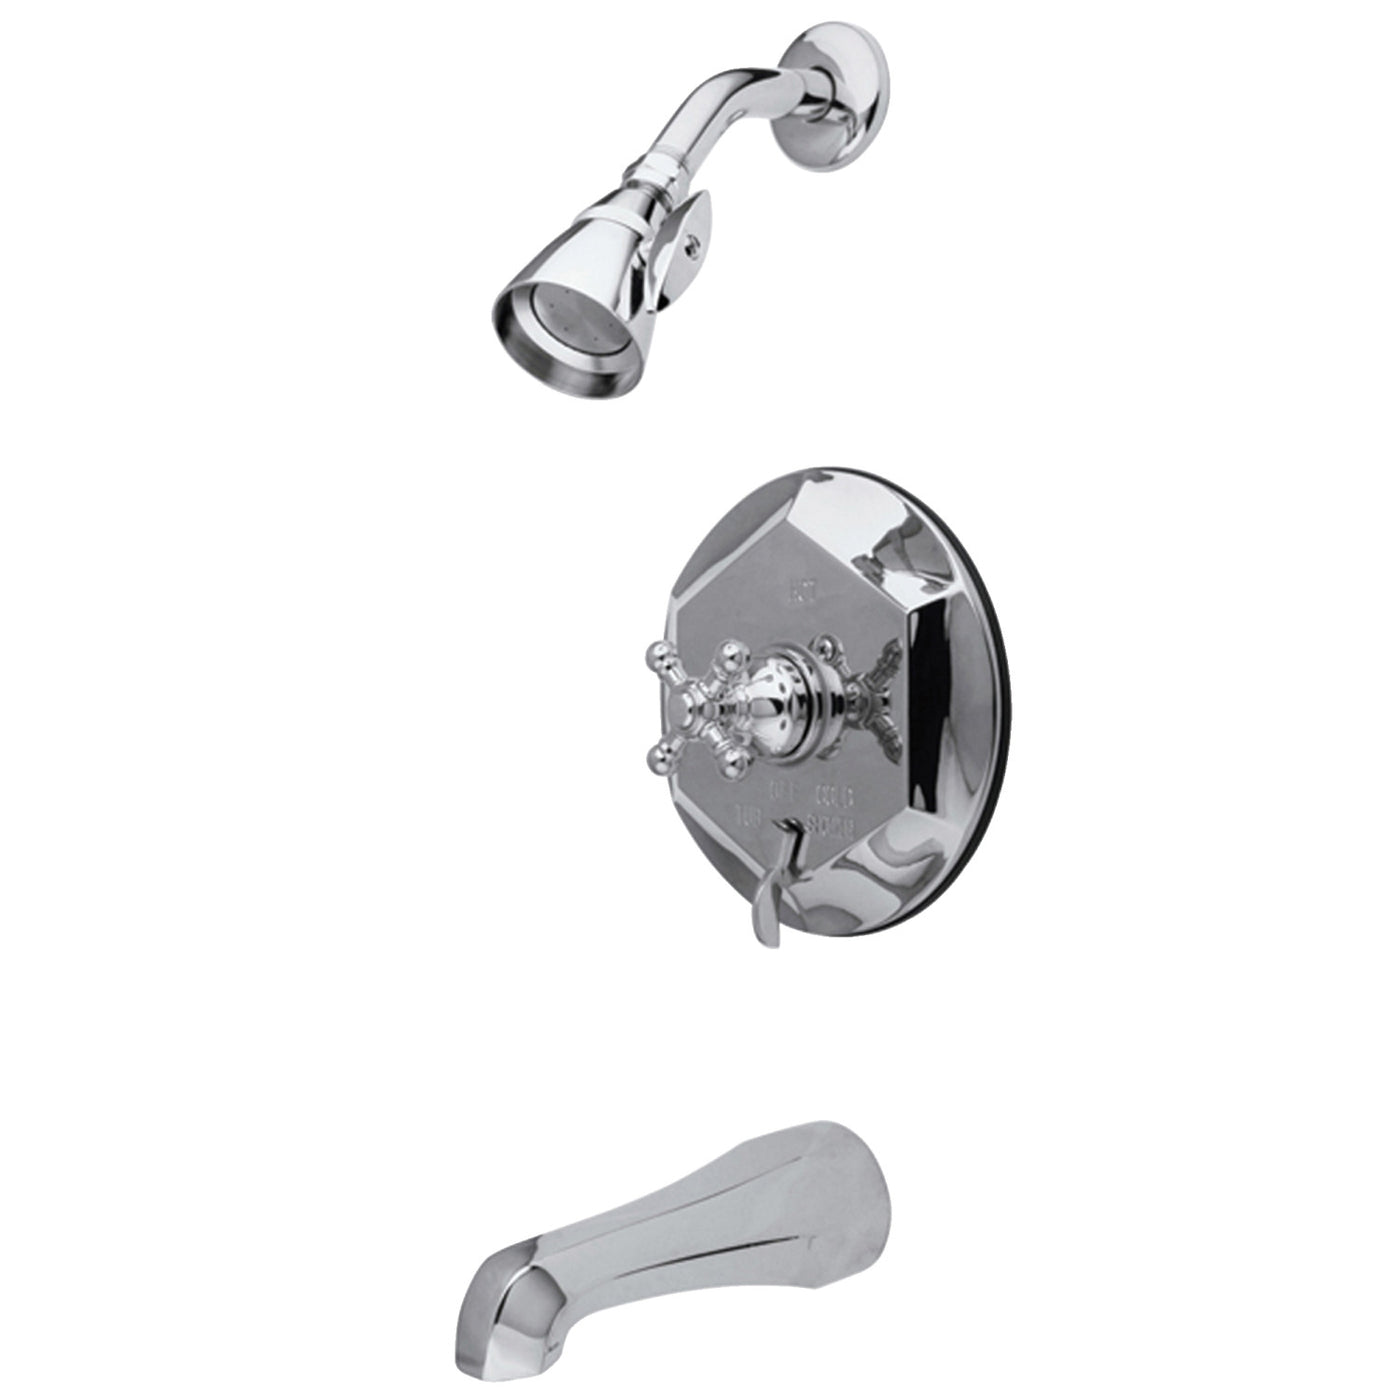 Elements of Design EB46310BX Tub and Shower Faucet, Polished Chrome